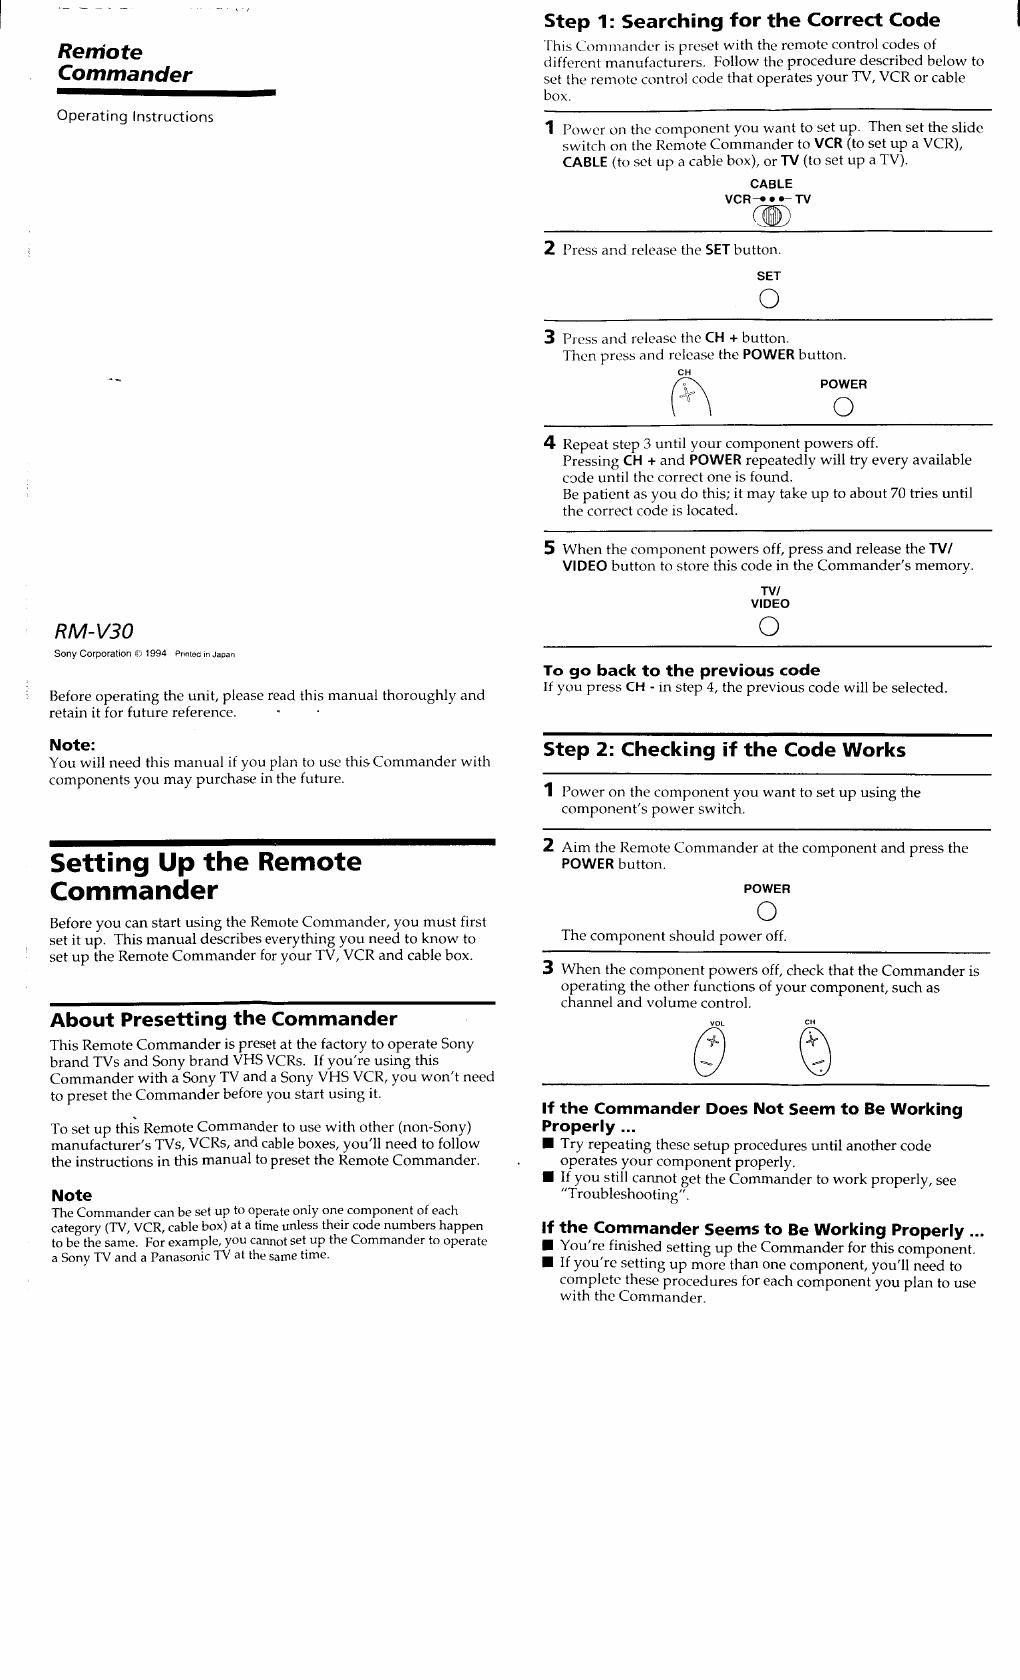 sony rm v 30 owners manual